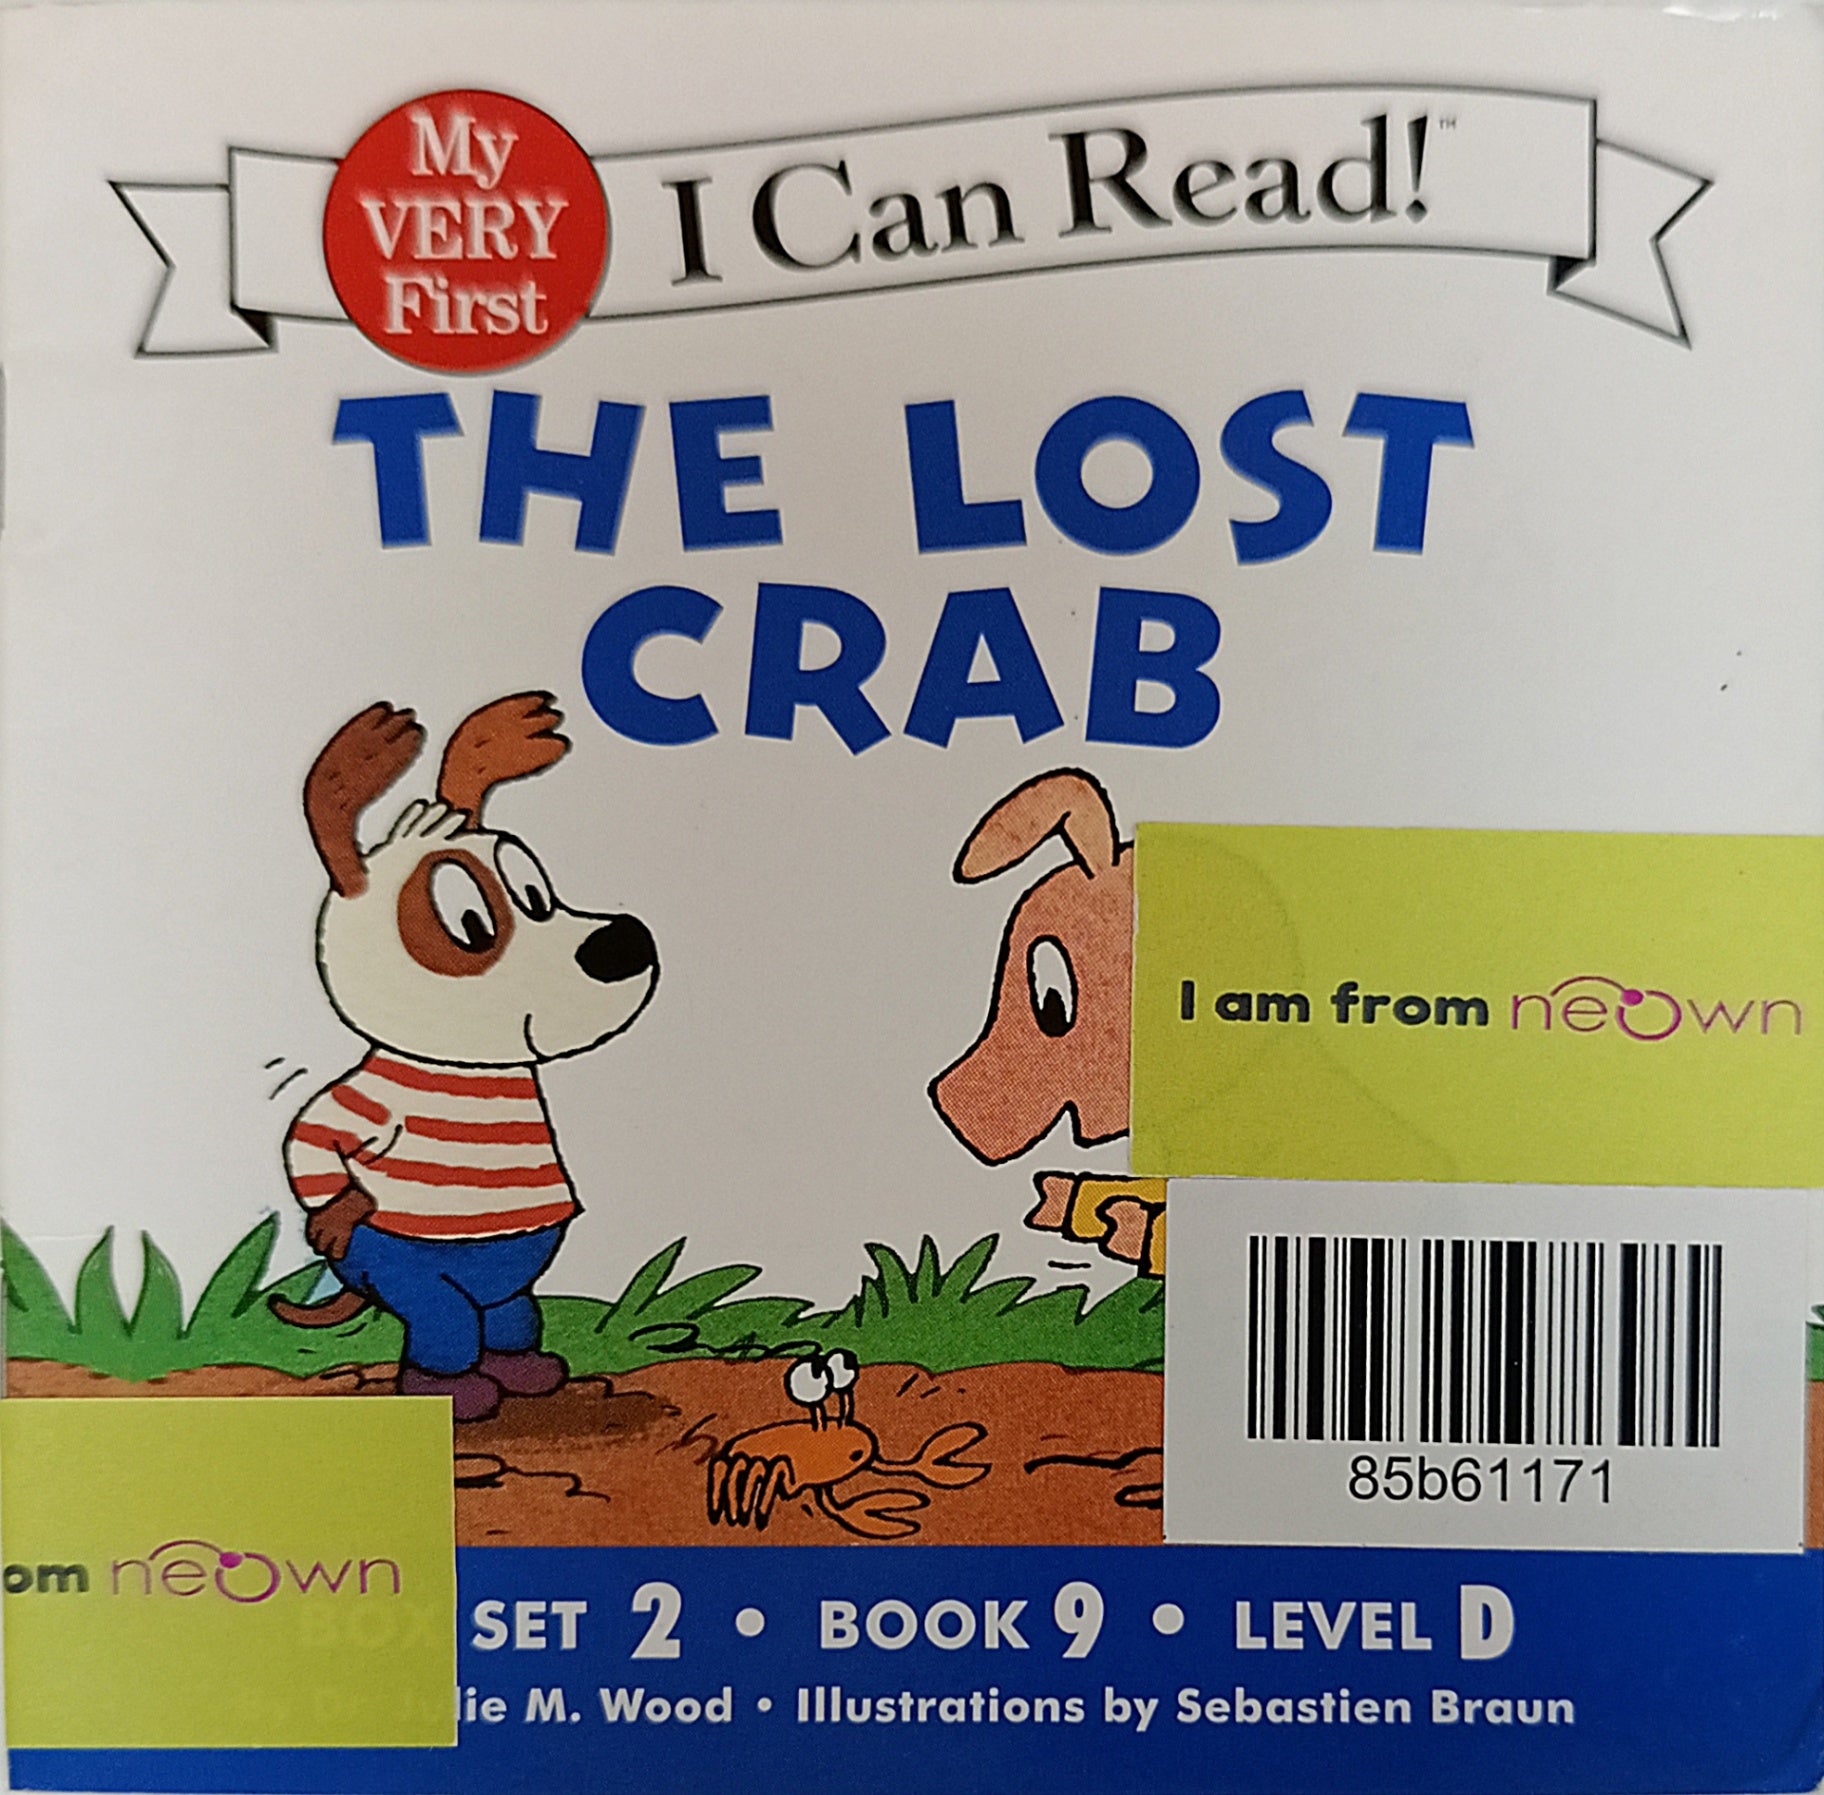 My Very First I Can Read! - The Lost Crab